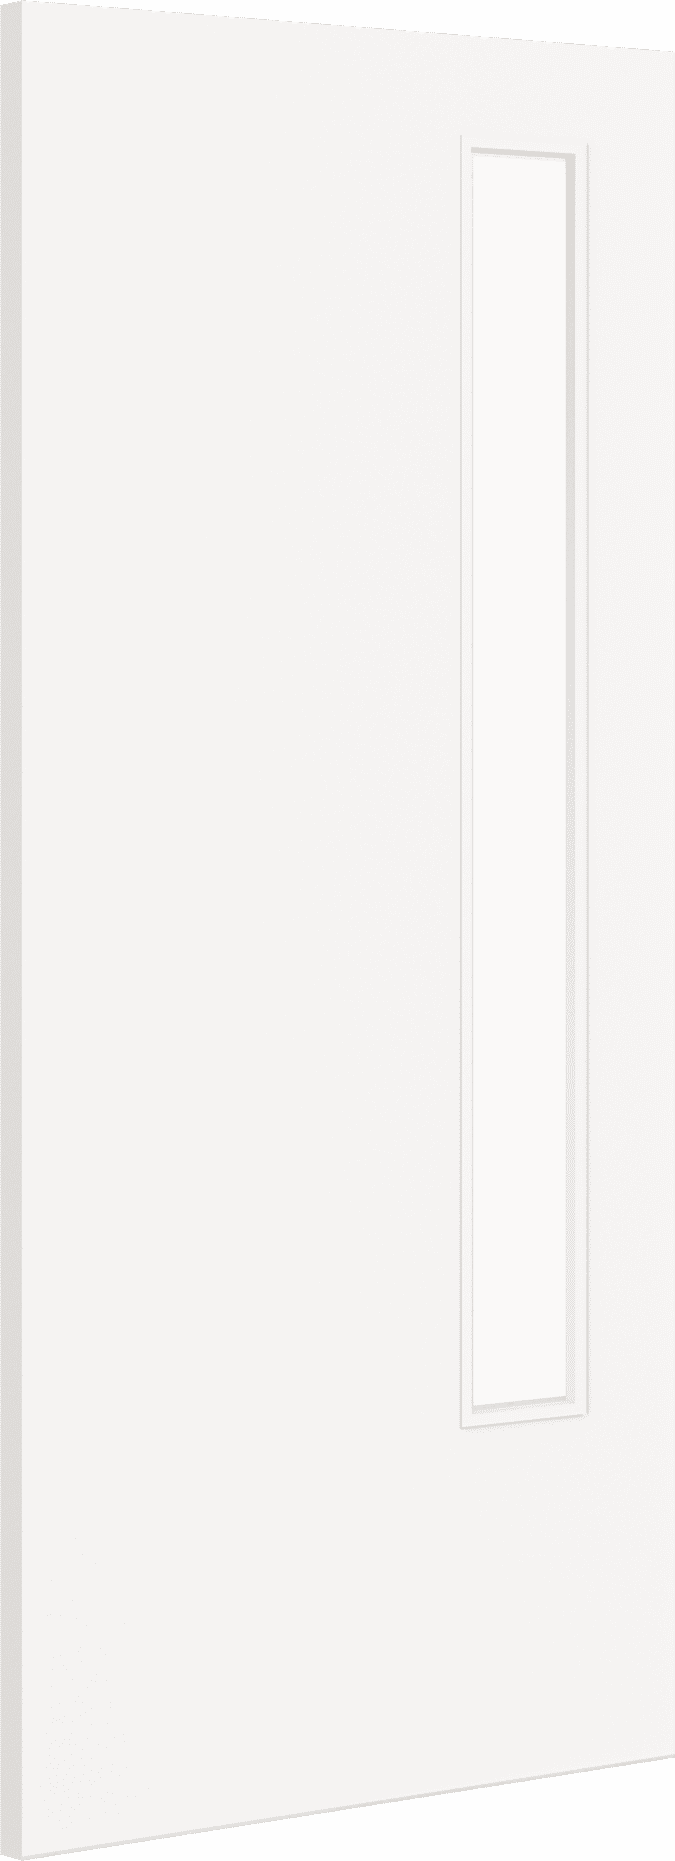 1981mm x 610mm x 44mm (24") Architectural Paint Grade White 13 Frosted Glazed Fire Door Blank